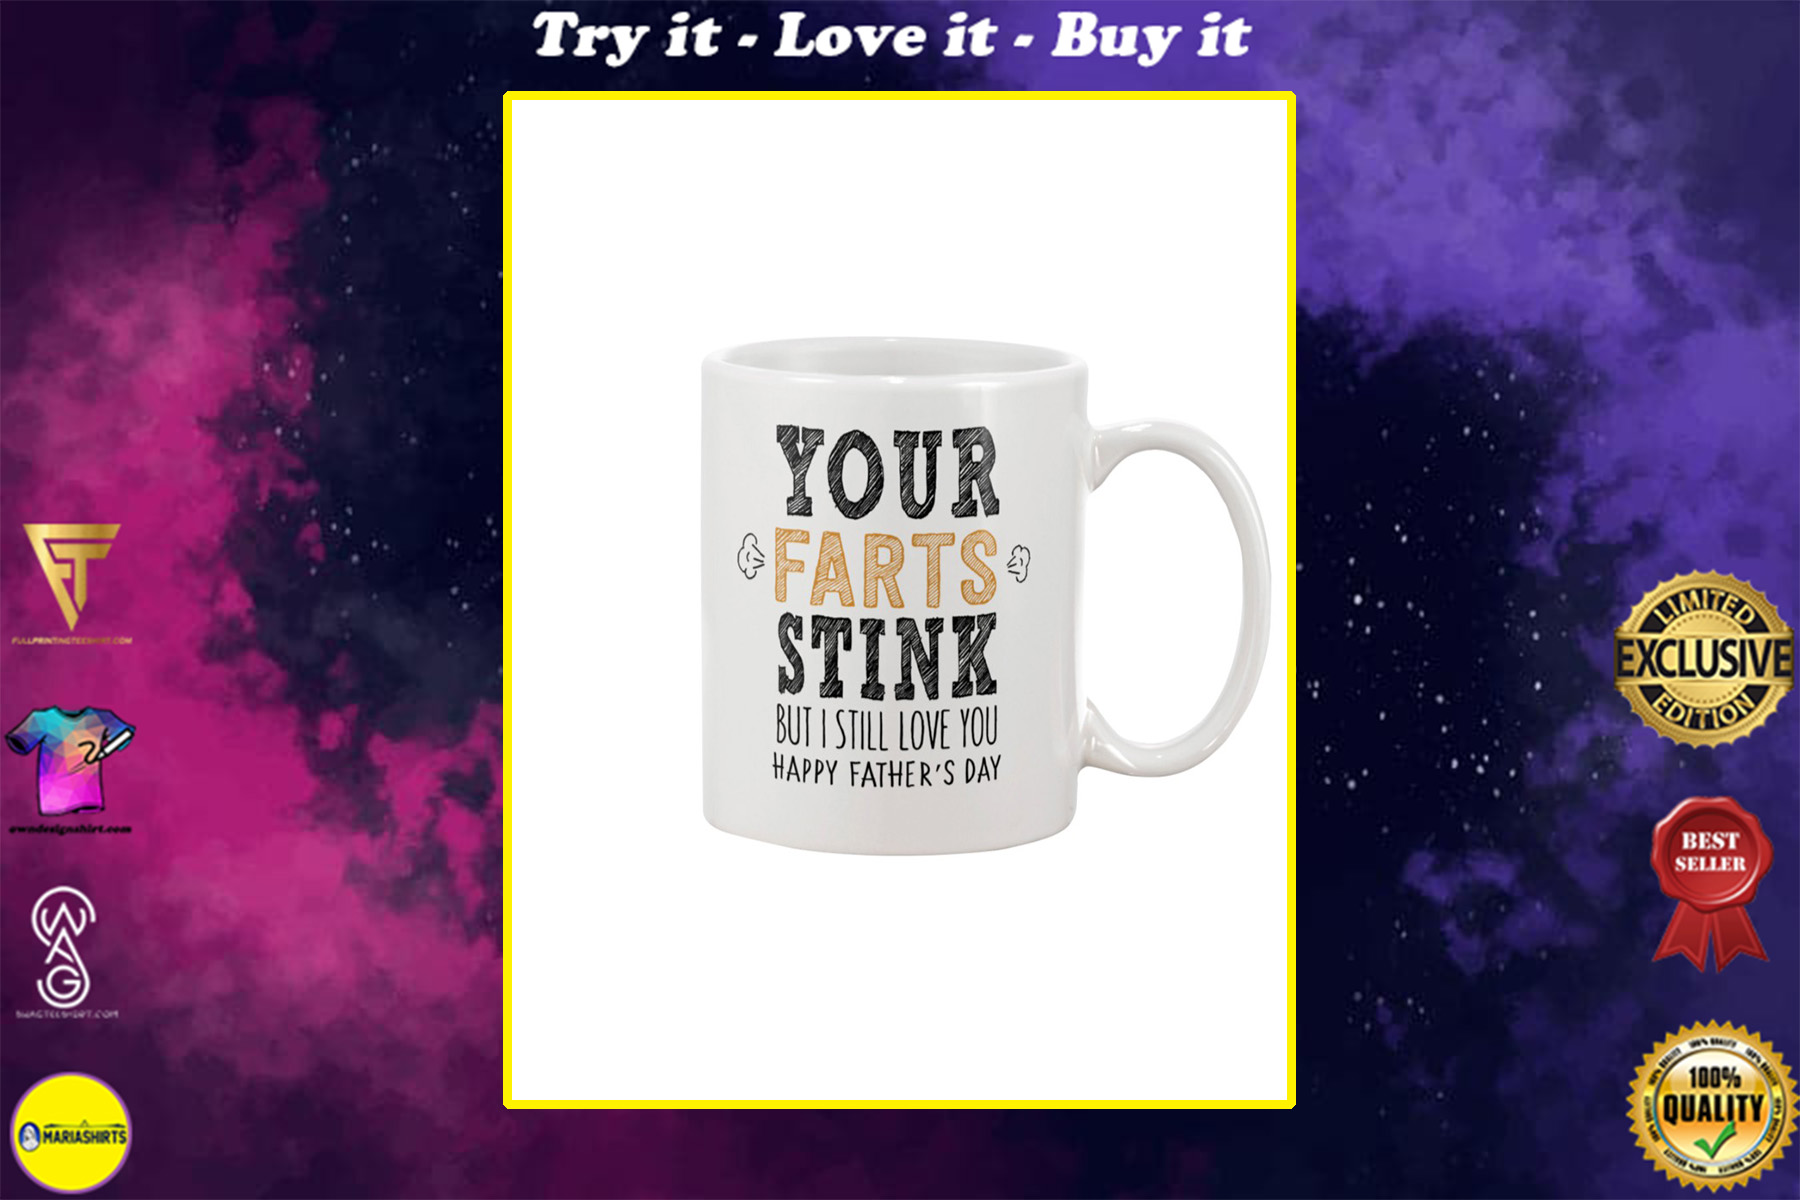 your farts stink but i still love you happy father's day mug